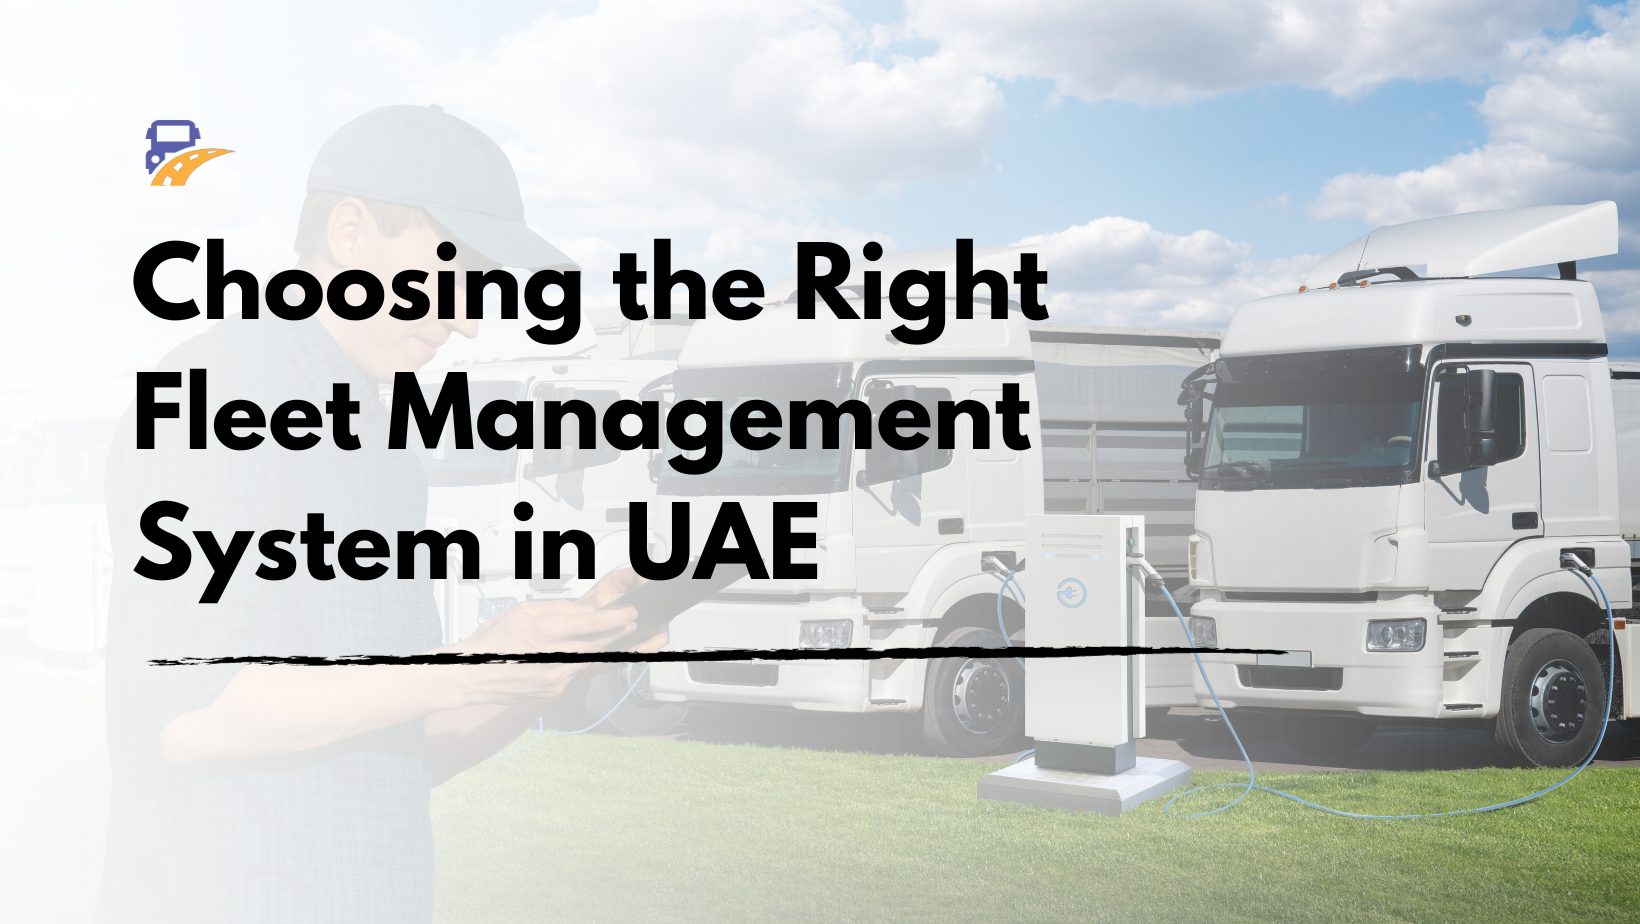 Choosing the Right Fleet Management System in UAE